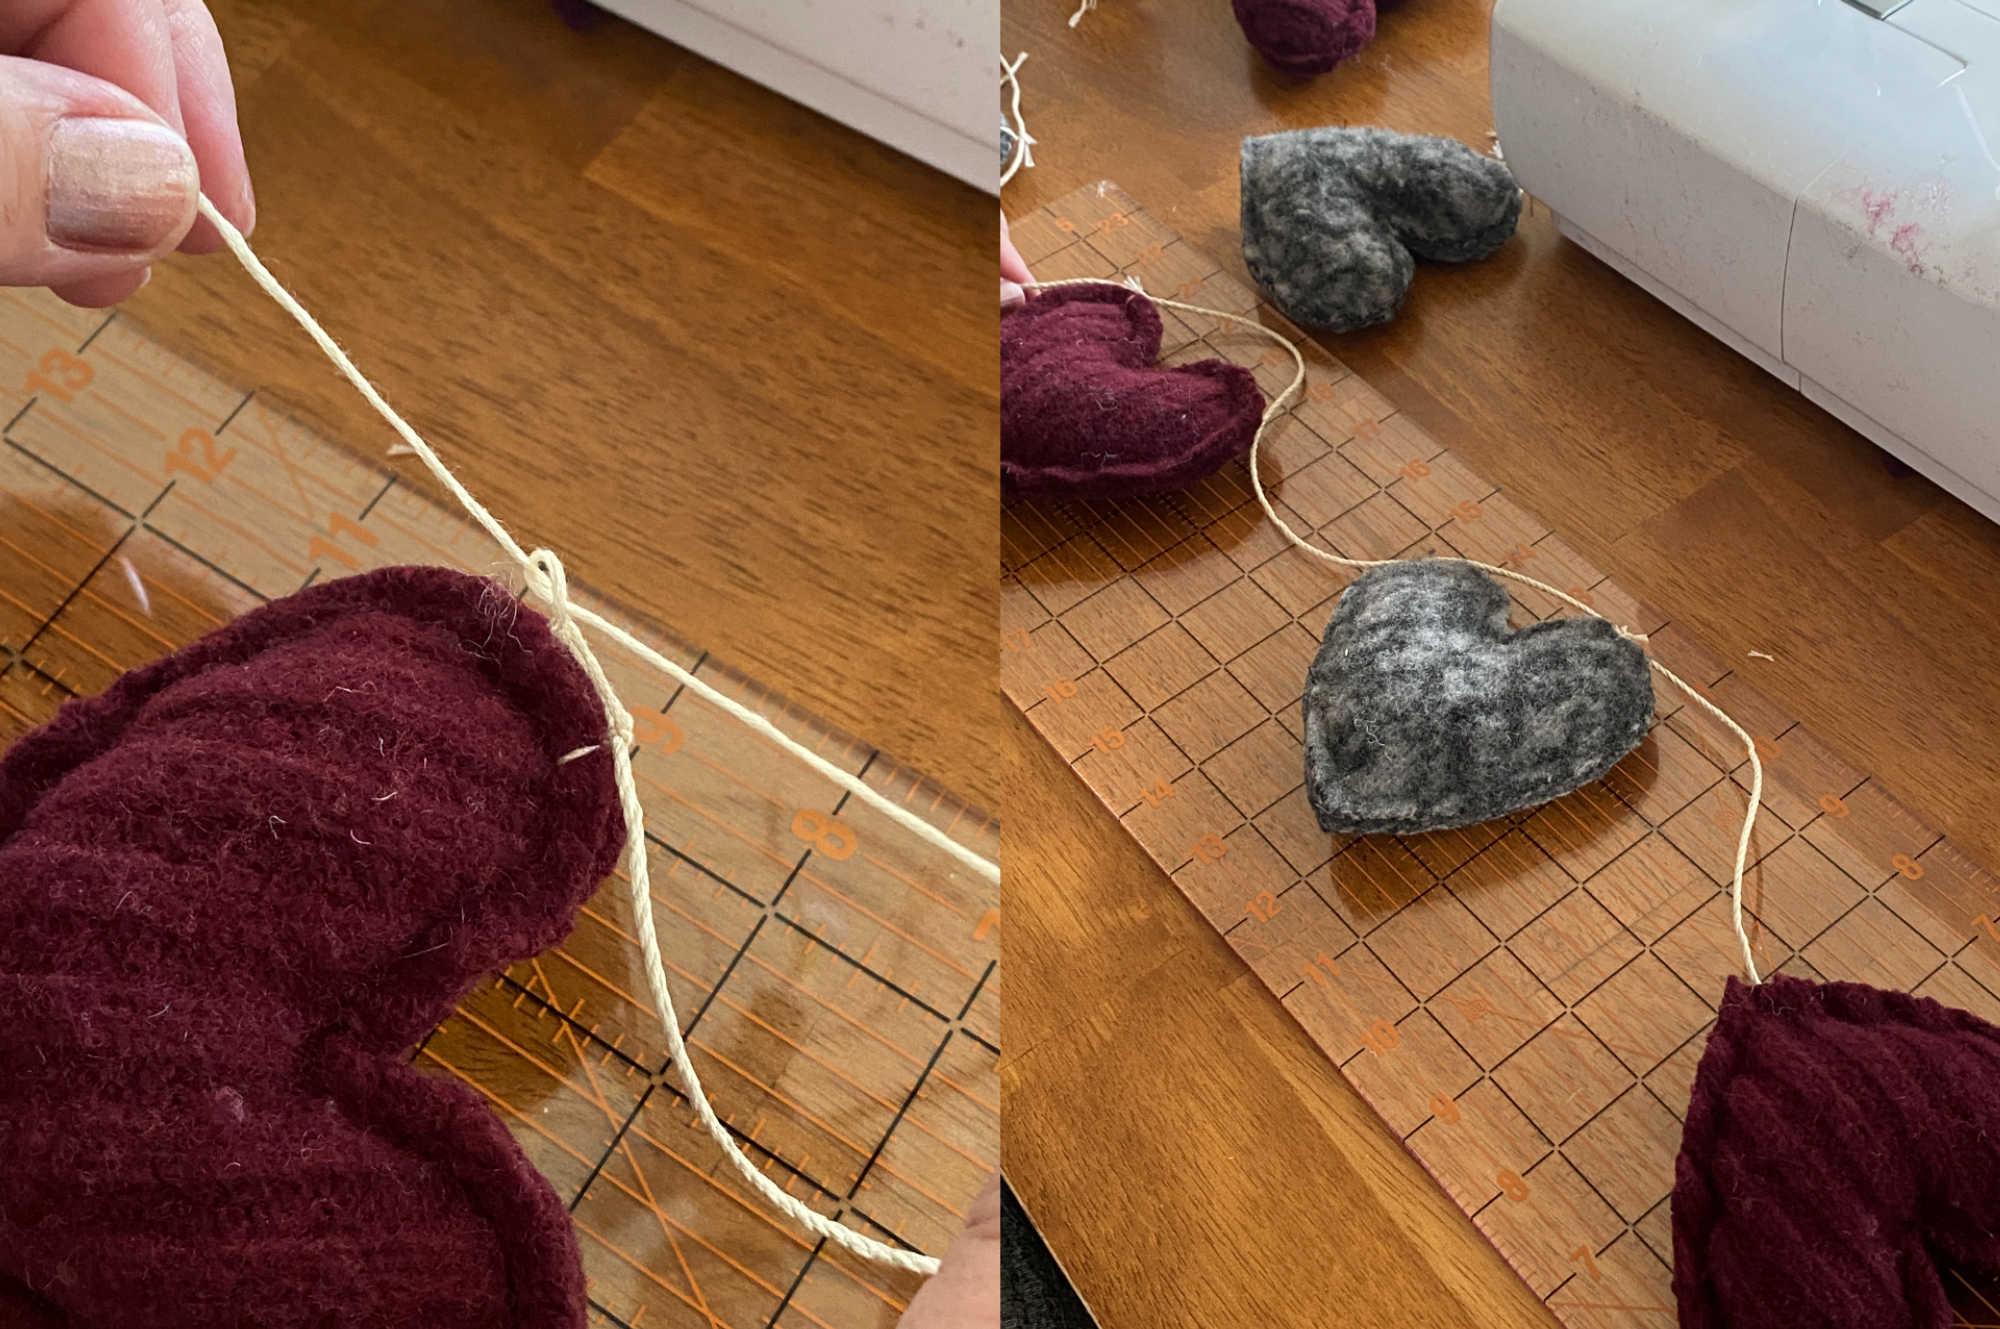 On the left, a maroon felted heart is attached to the garland via a square knot, tied through the loop created in the previous step. On the right, the garland lies on a table, showing that the hearts are evenly spaced.